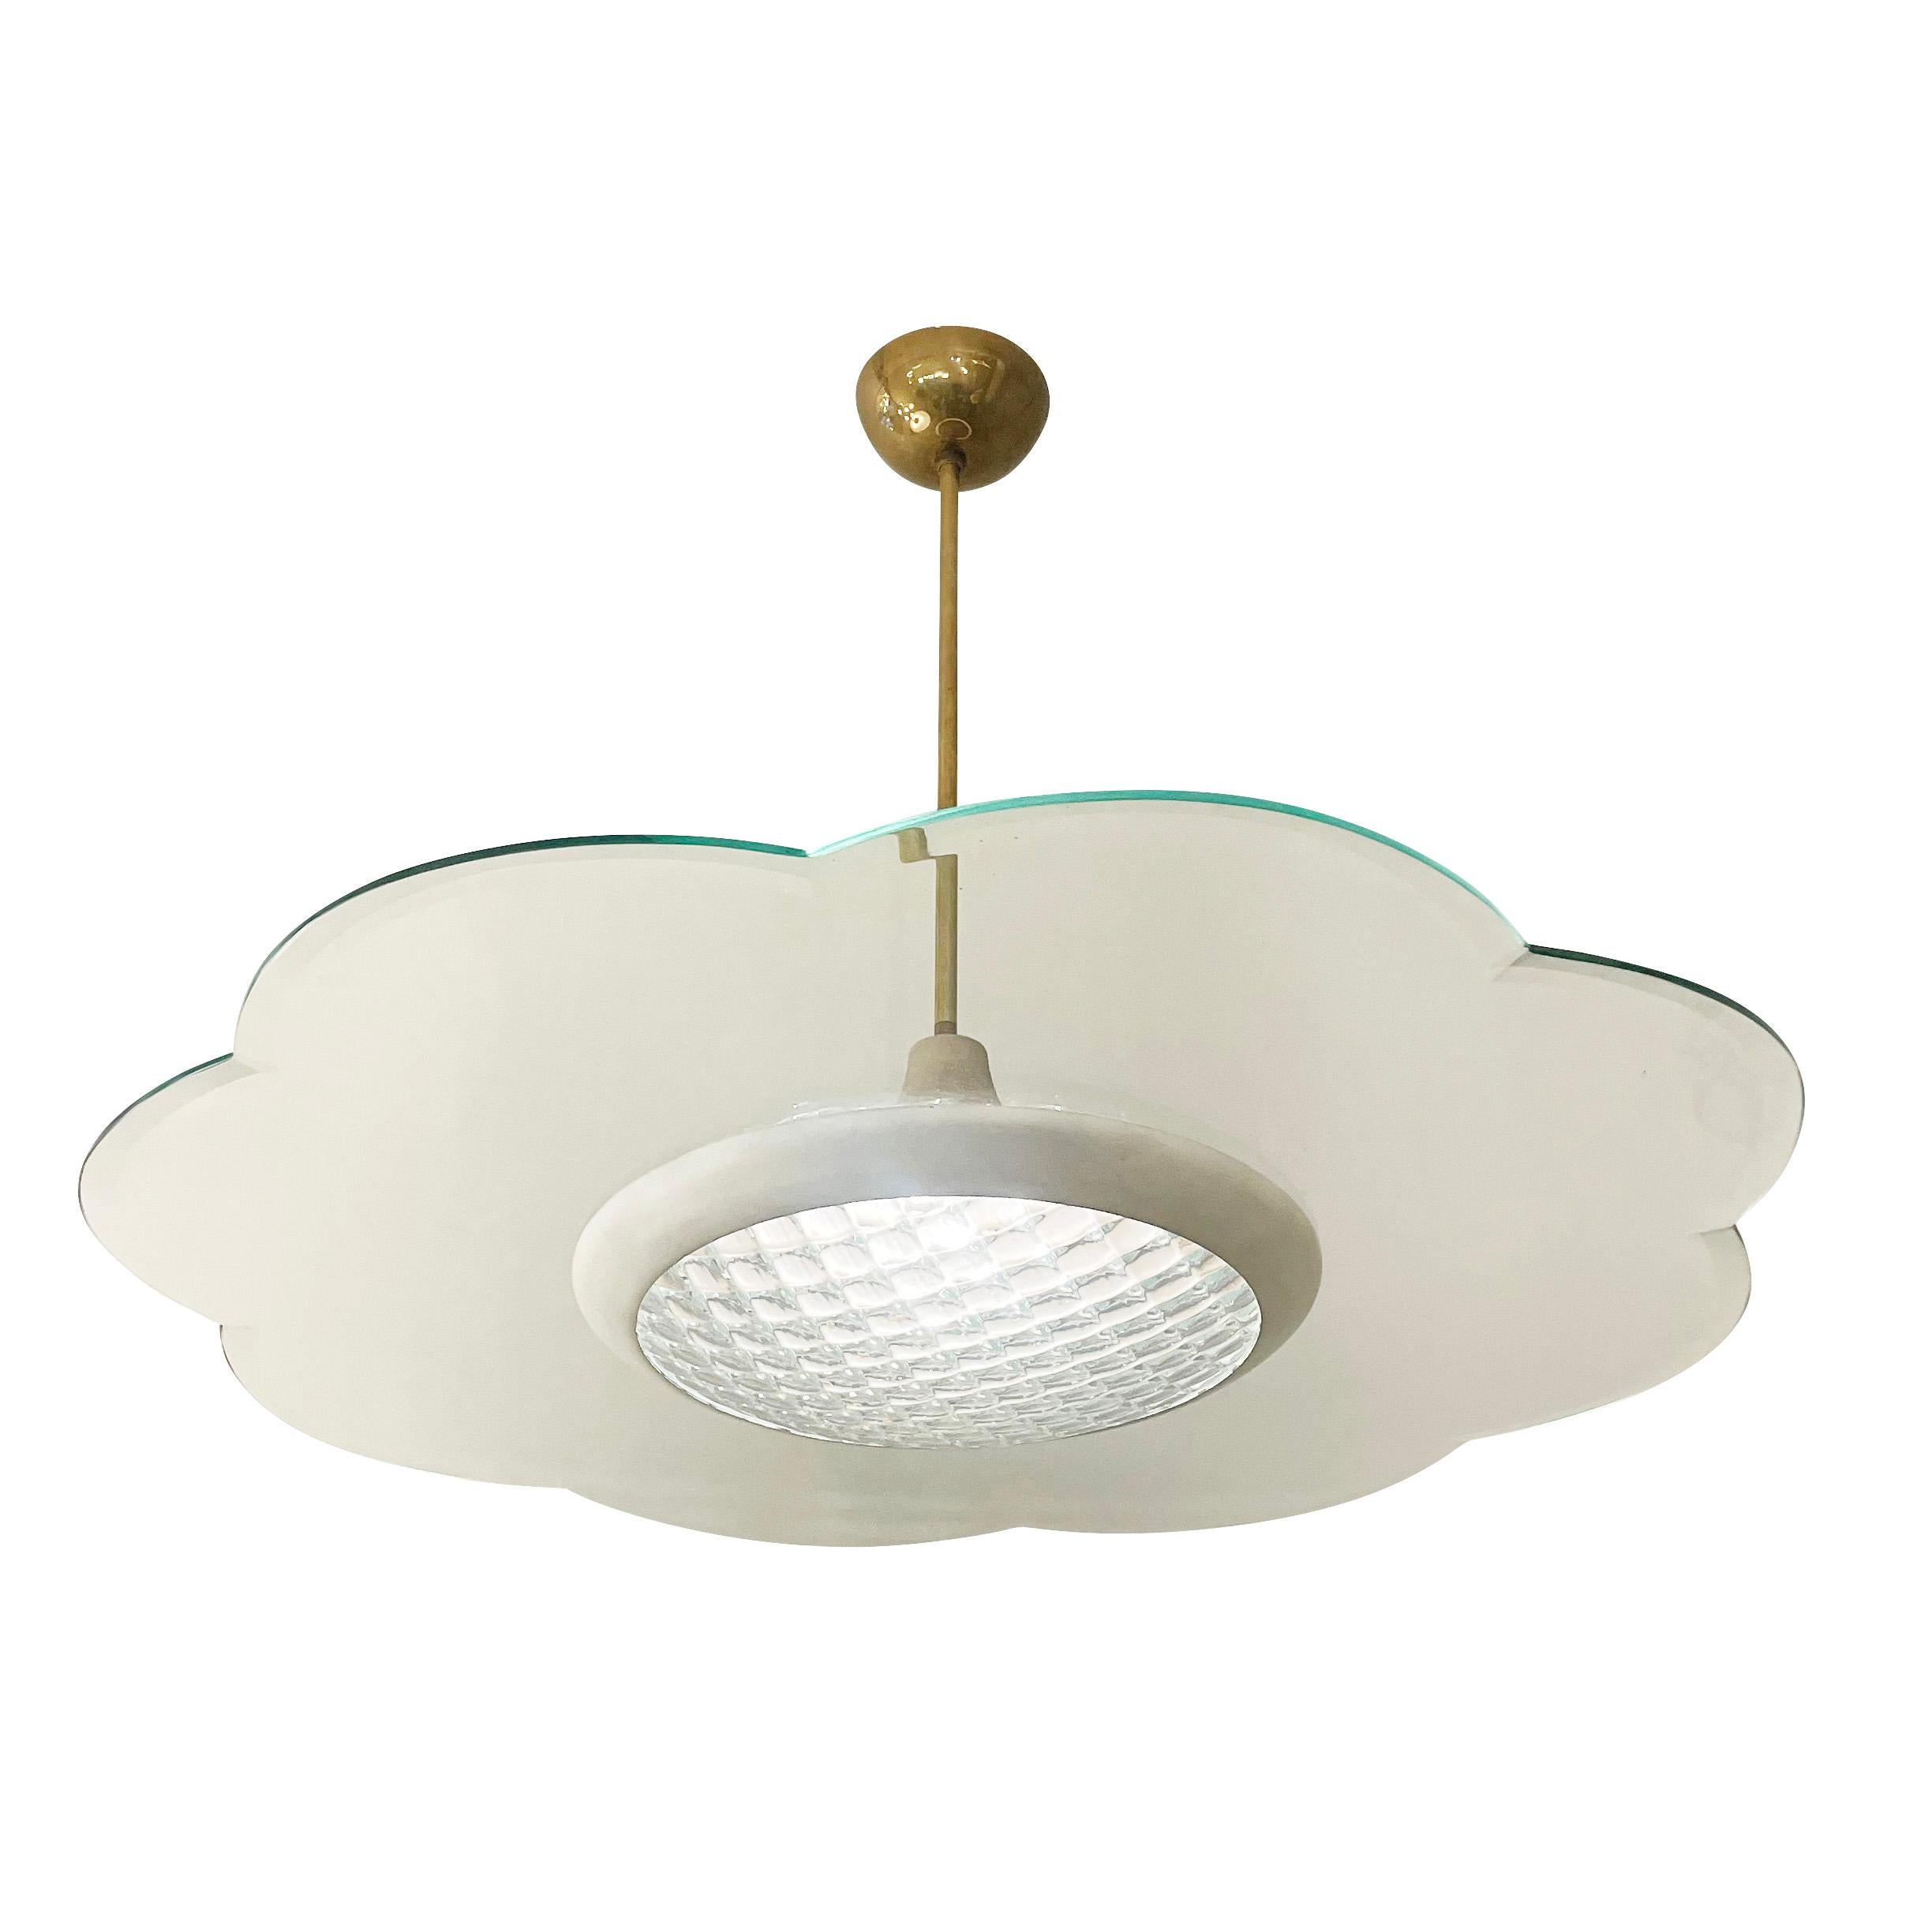 Italian Midcentury chandelier with scalloped glass.
$3,500.00
Italian midcentury chandelier with a large flat glass with scalloped edges and a central curved glass with a square pattern. Framing is brass and white. Holds one E26 socket. Height can